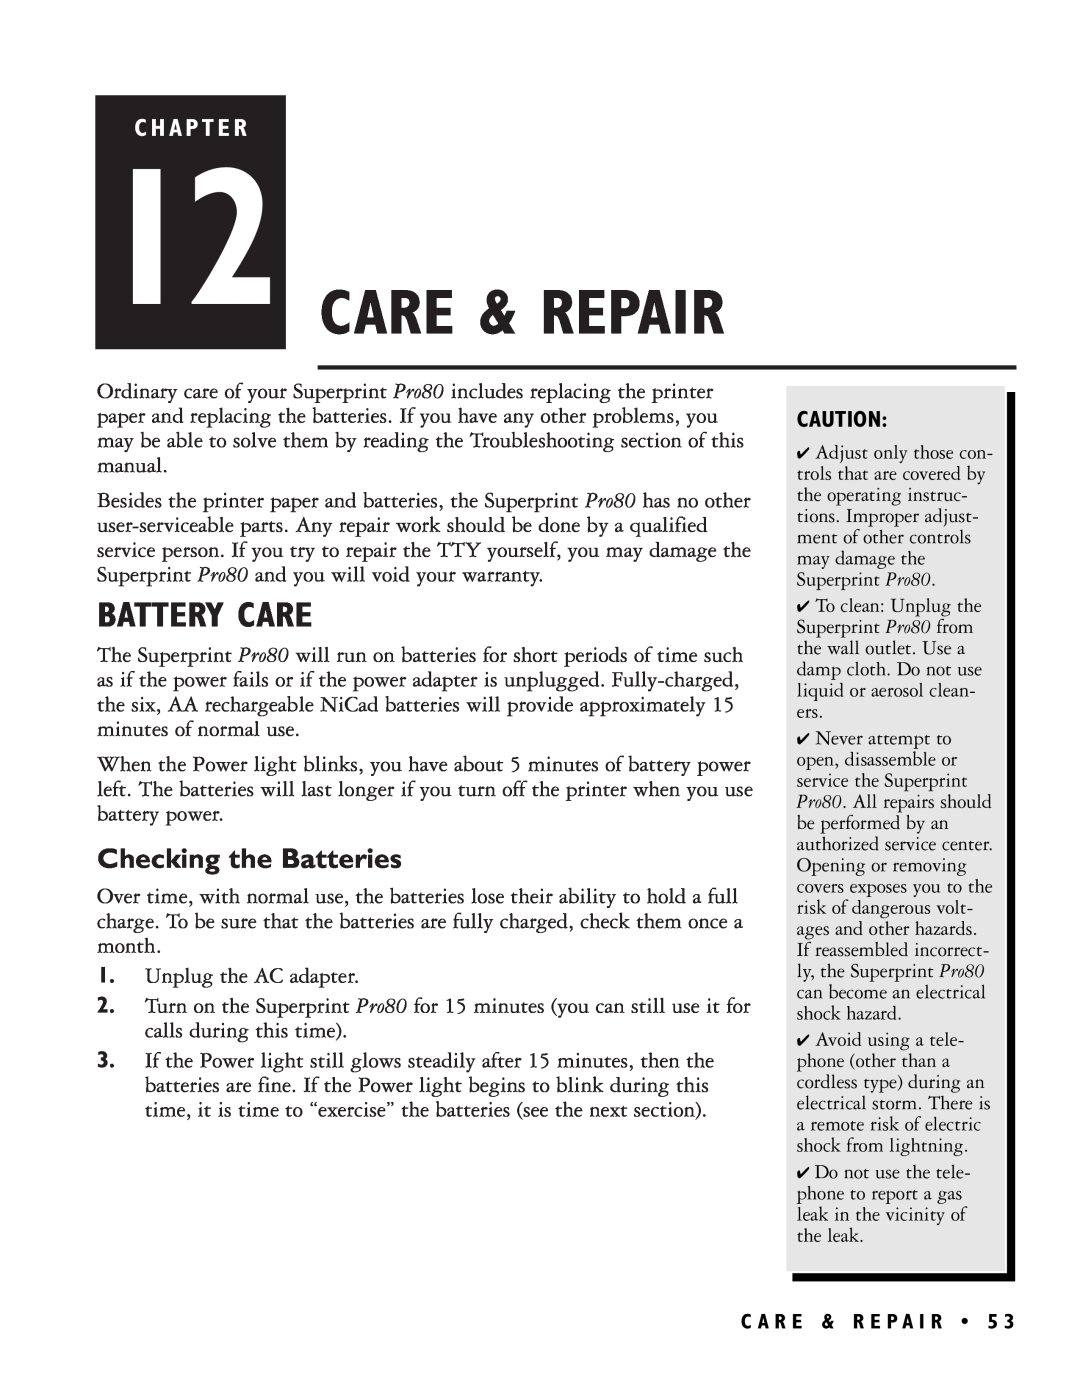 Ultratec PRO80TM manual Care & Repair, Battery Care, Checking the Batteries, C H A P T E R 